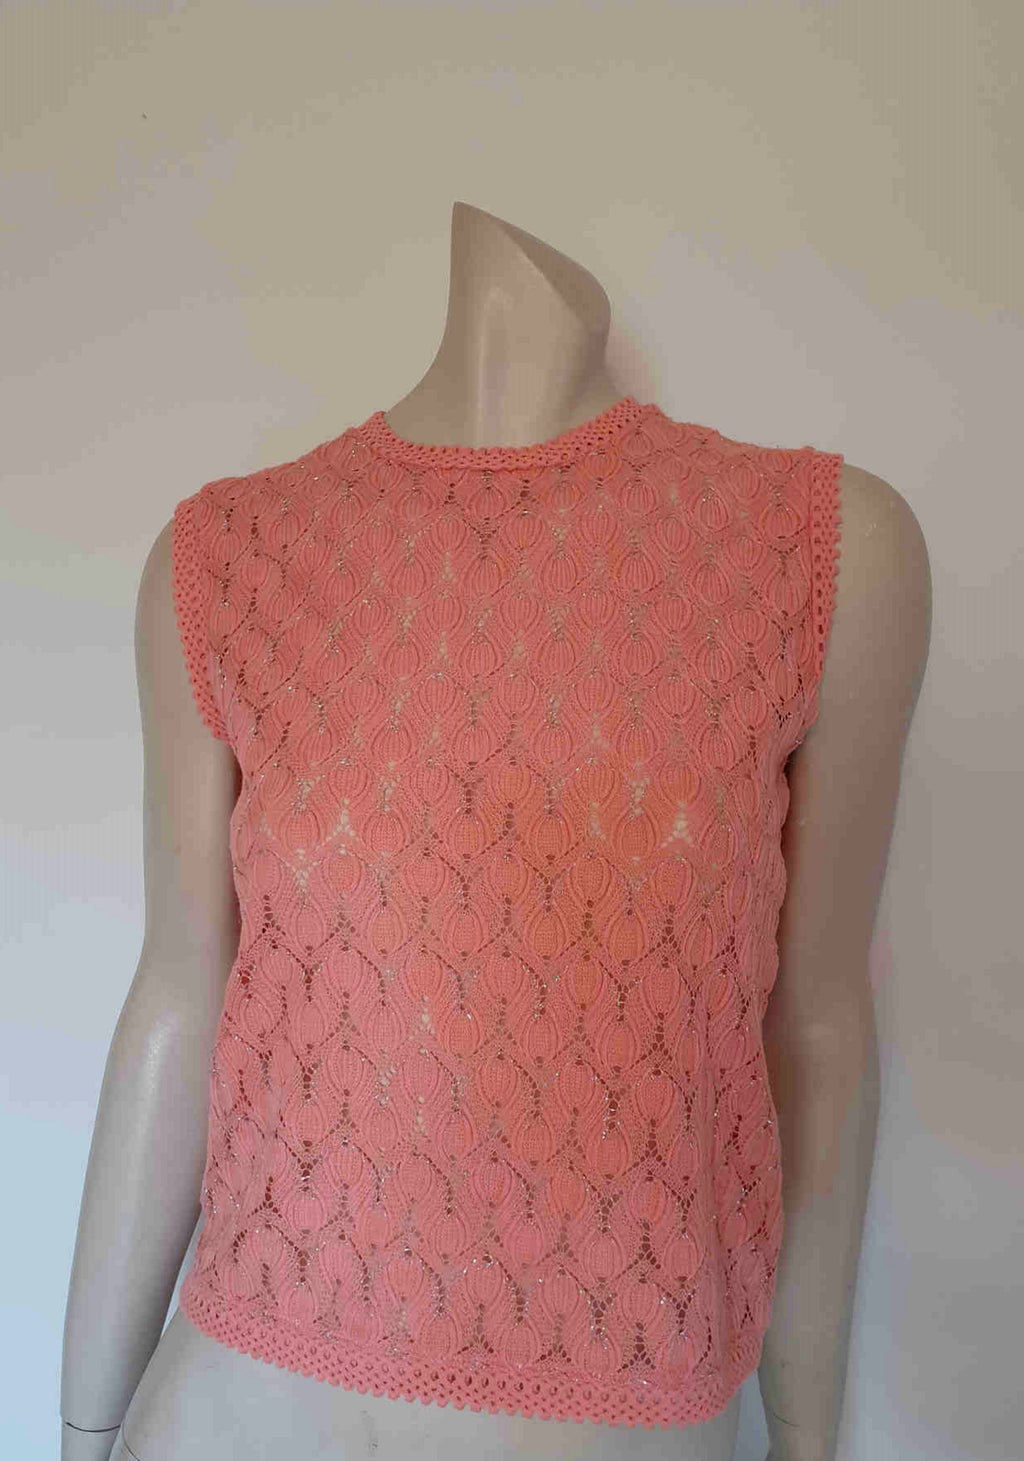 1960s vintage pink lacy top with silver lurex